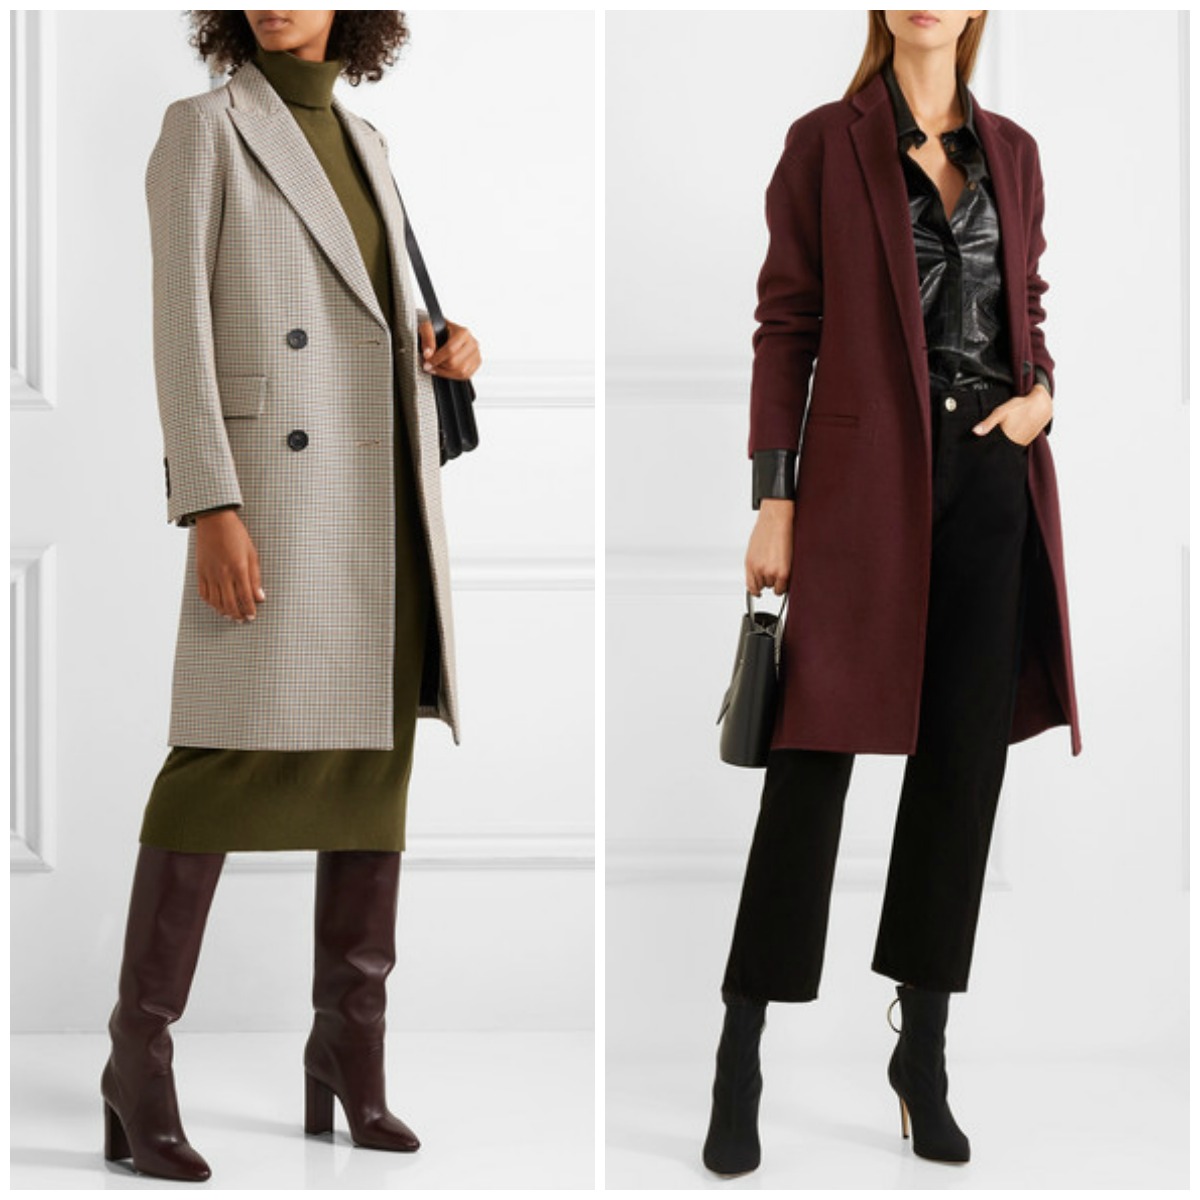 Theory houndstooth and Vince burgundy wool coats on sale. Details at une femme d'un certain age.